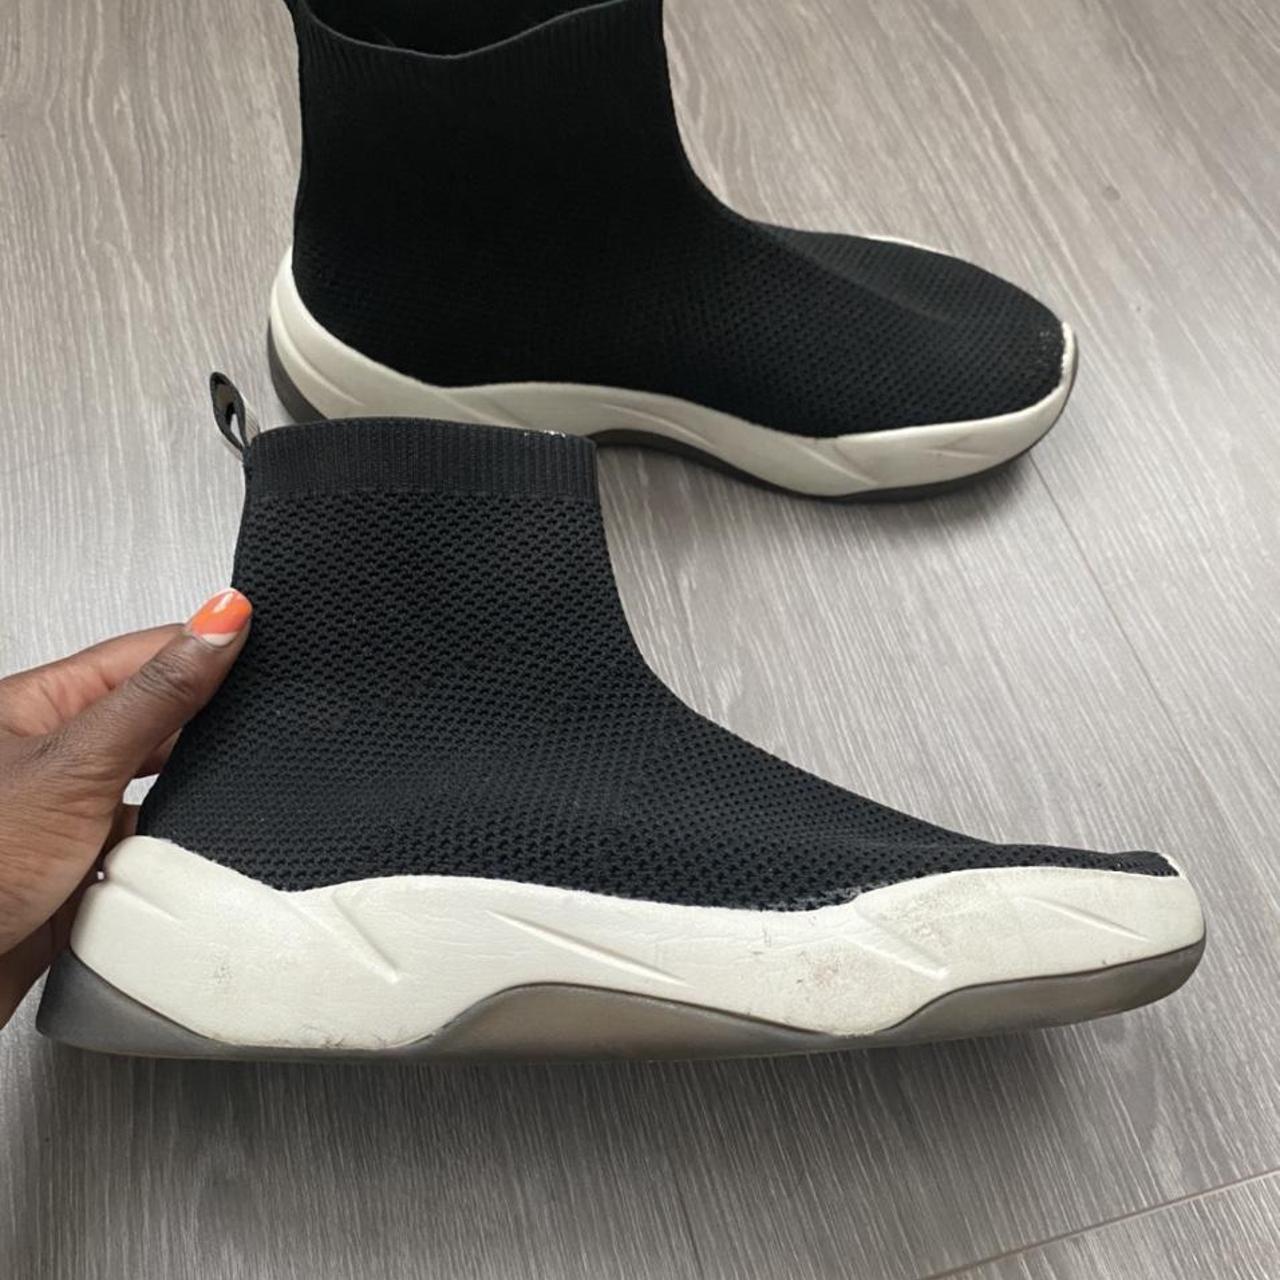 Zara is selling these bizarre £55.99 sock shoes... and people are very  confused by them | The Sun